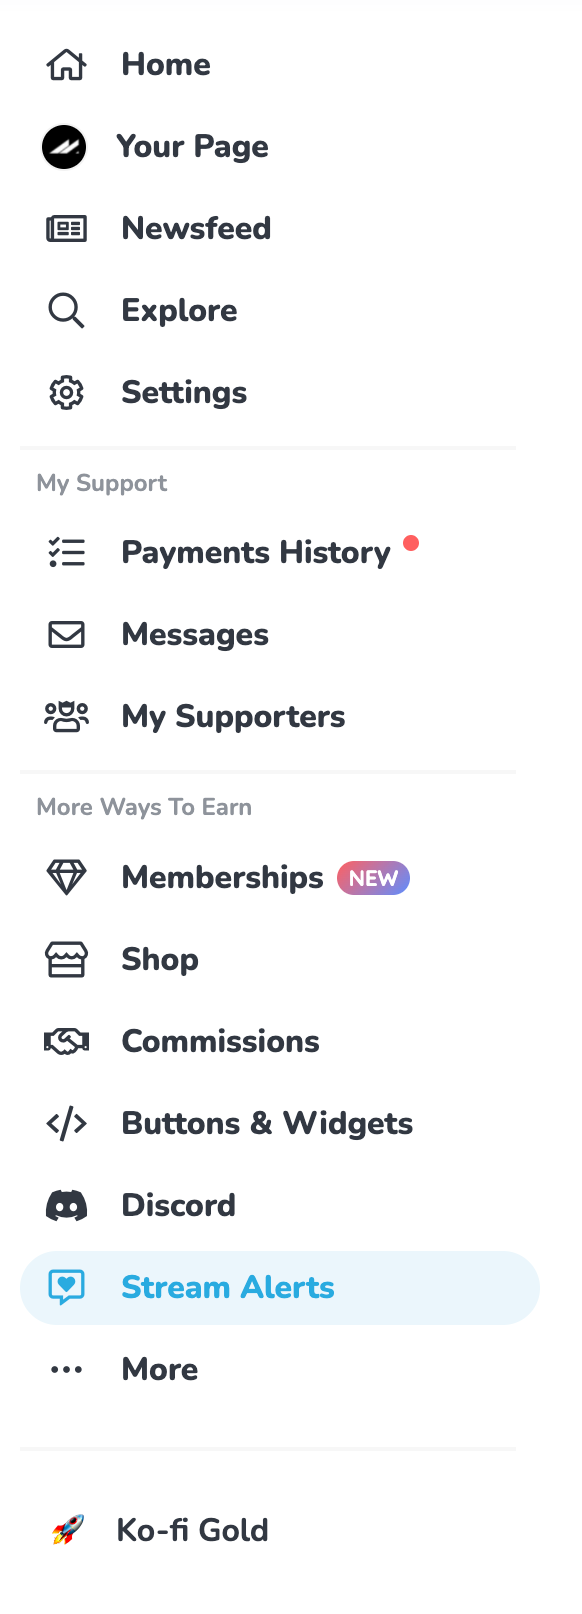 stream ending animated text - oddie's Ko-fi Shop - Ko-fi ❤️ Where creators  get support from fans through donations, memberships, shop sales and more!  The original 'Buy Me a Coffee' Page.